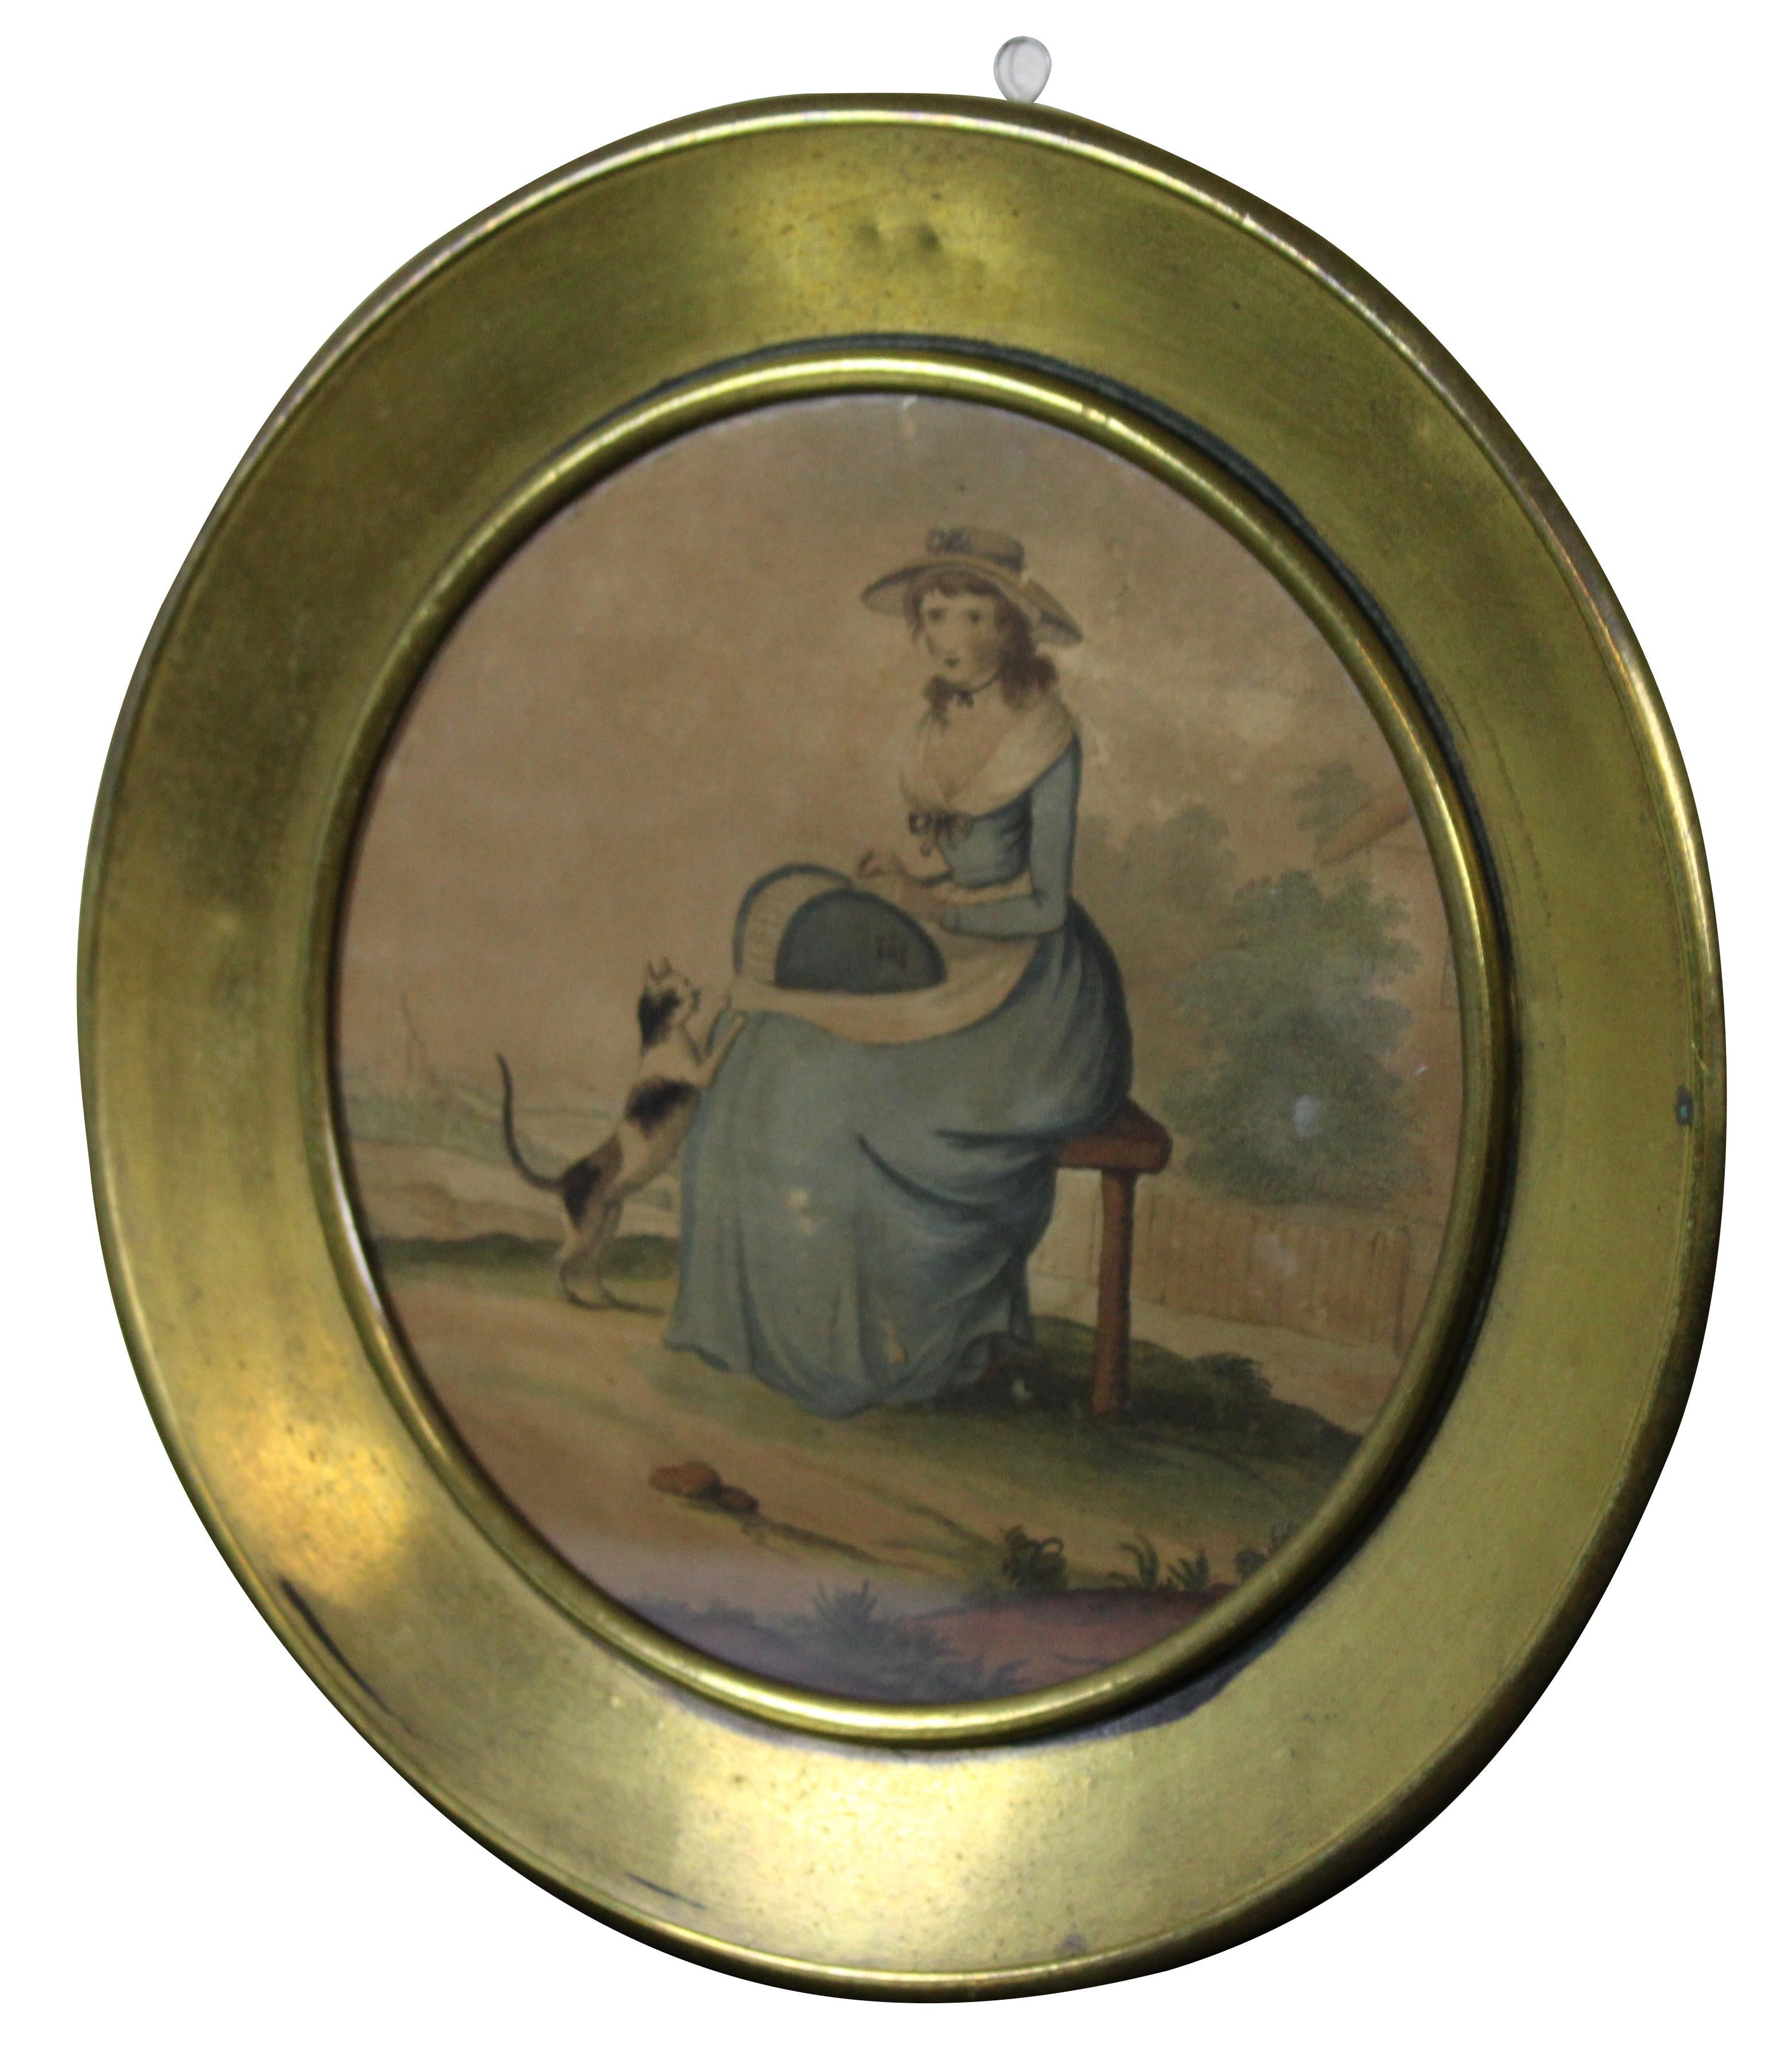 Antique colored lithograph print of an 18th century woman in a blue dress seated in a garden with a calico cat, displayed in a round brass frame.

Measures: 10.75” x 0.75” x 10.75” / Sans Frame - 7.25” x 7.25” (Width x Depth x Height).
 